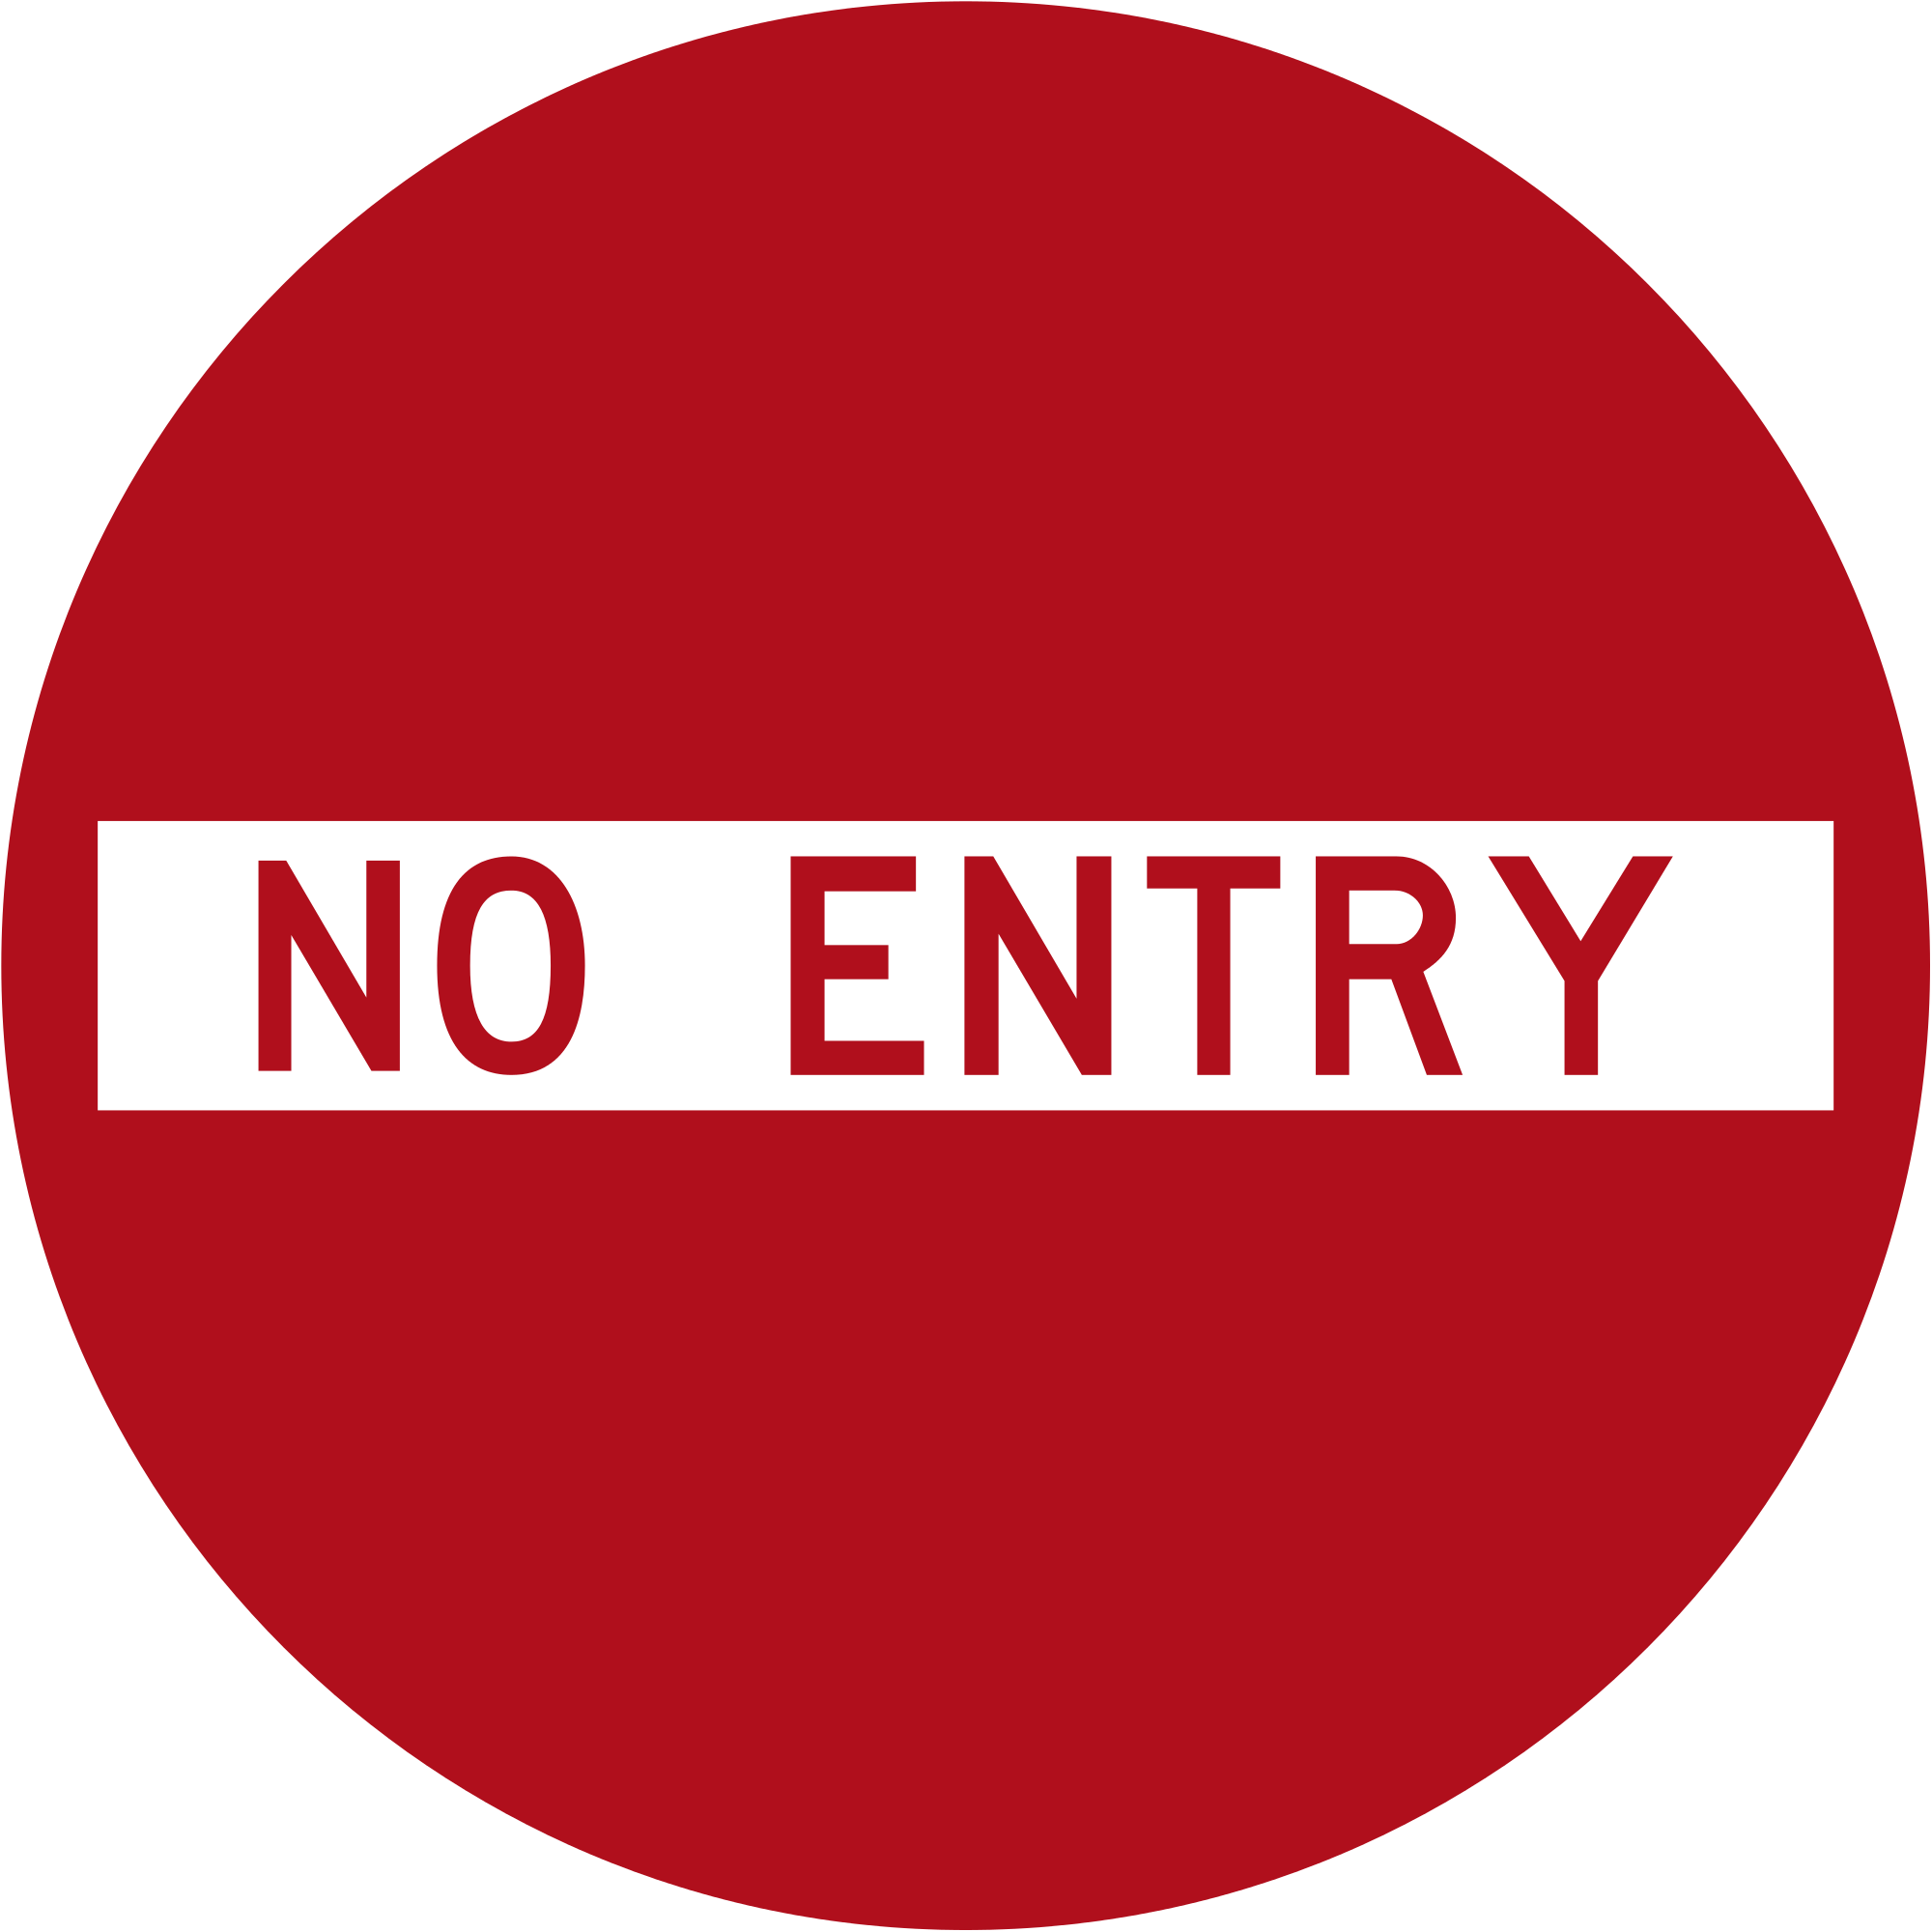 No Entry Red Symbol PNG HD Quality